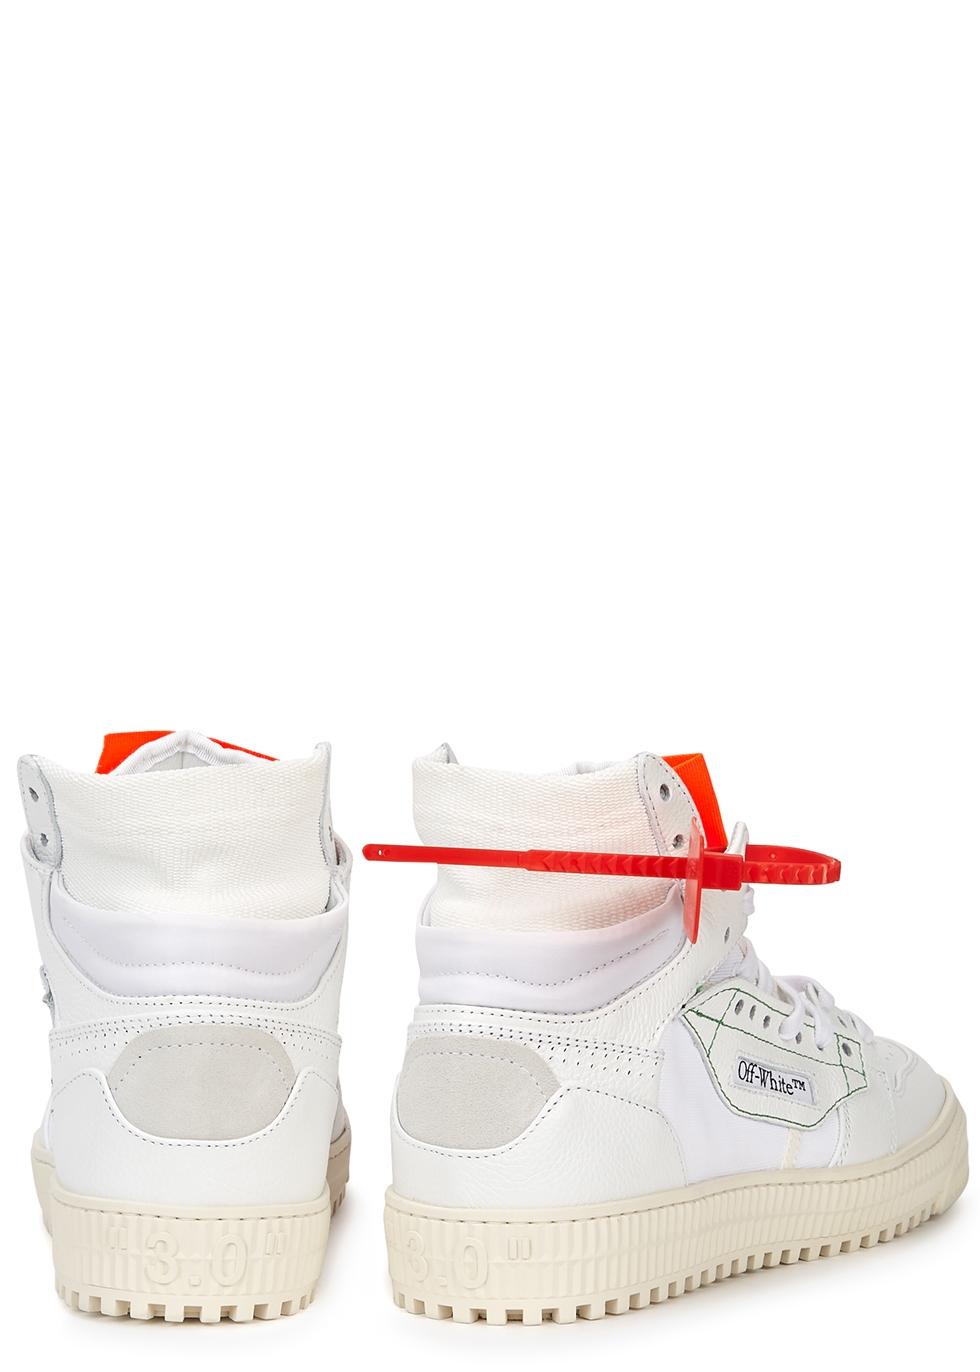 Off-Court 3.0 white leather hi-top 